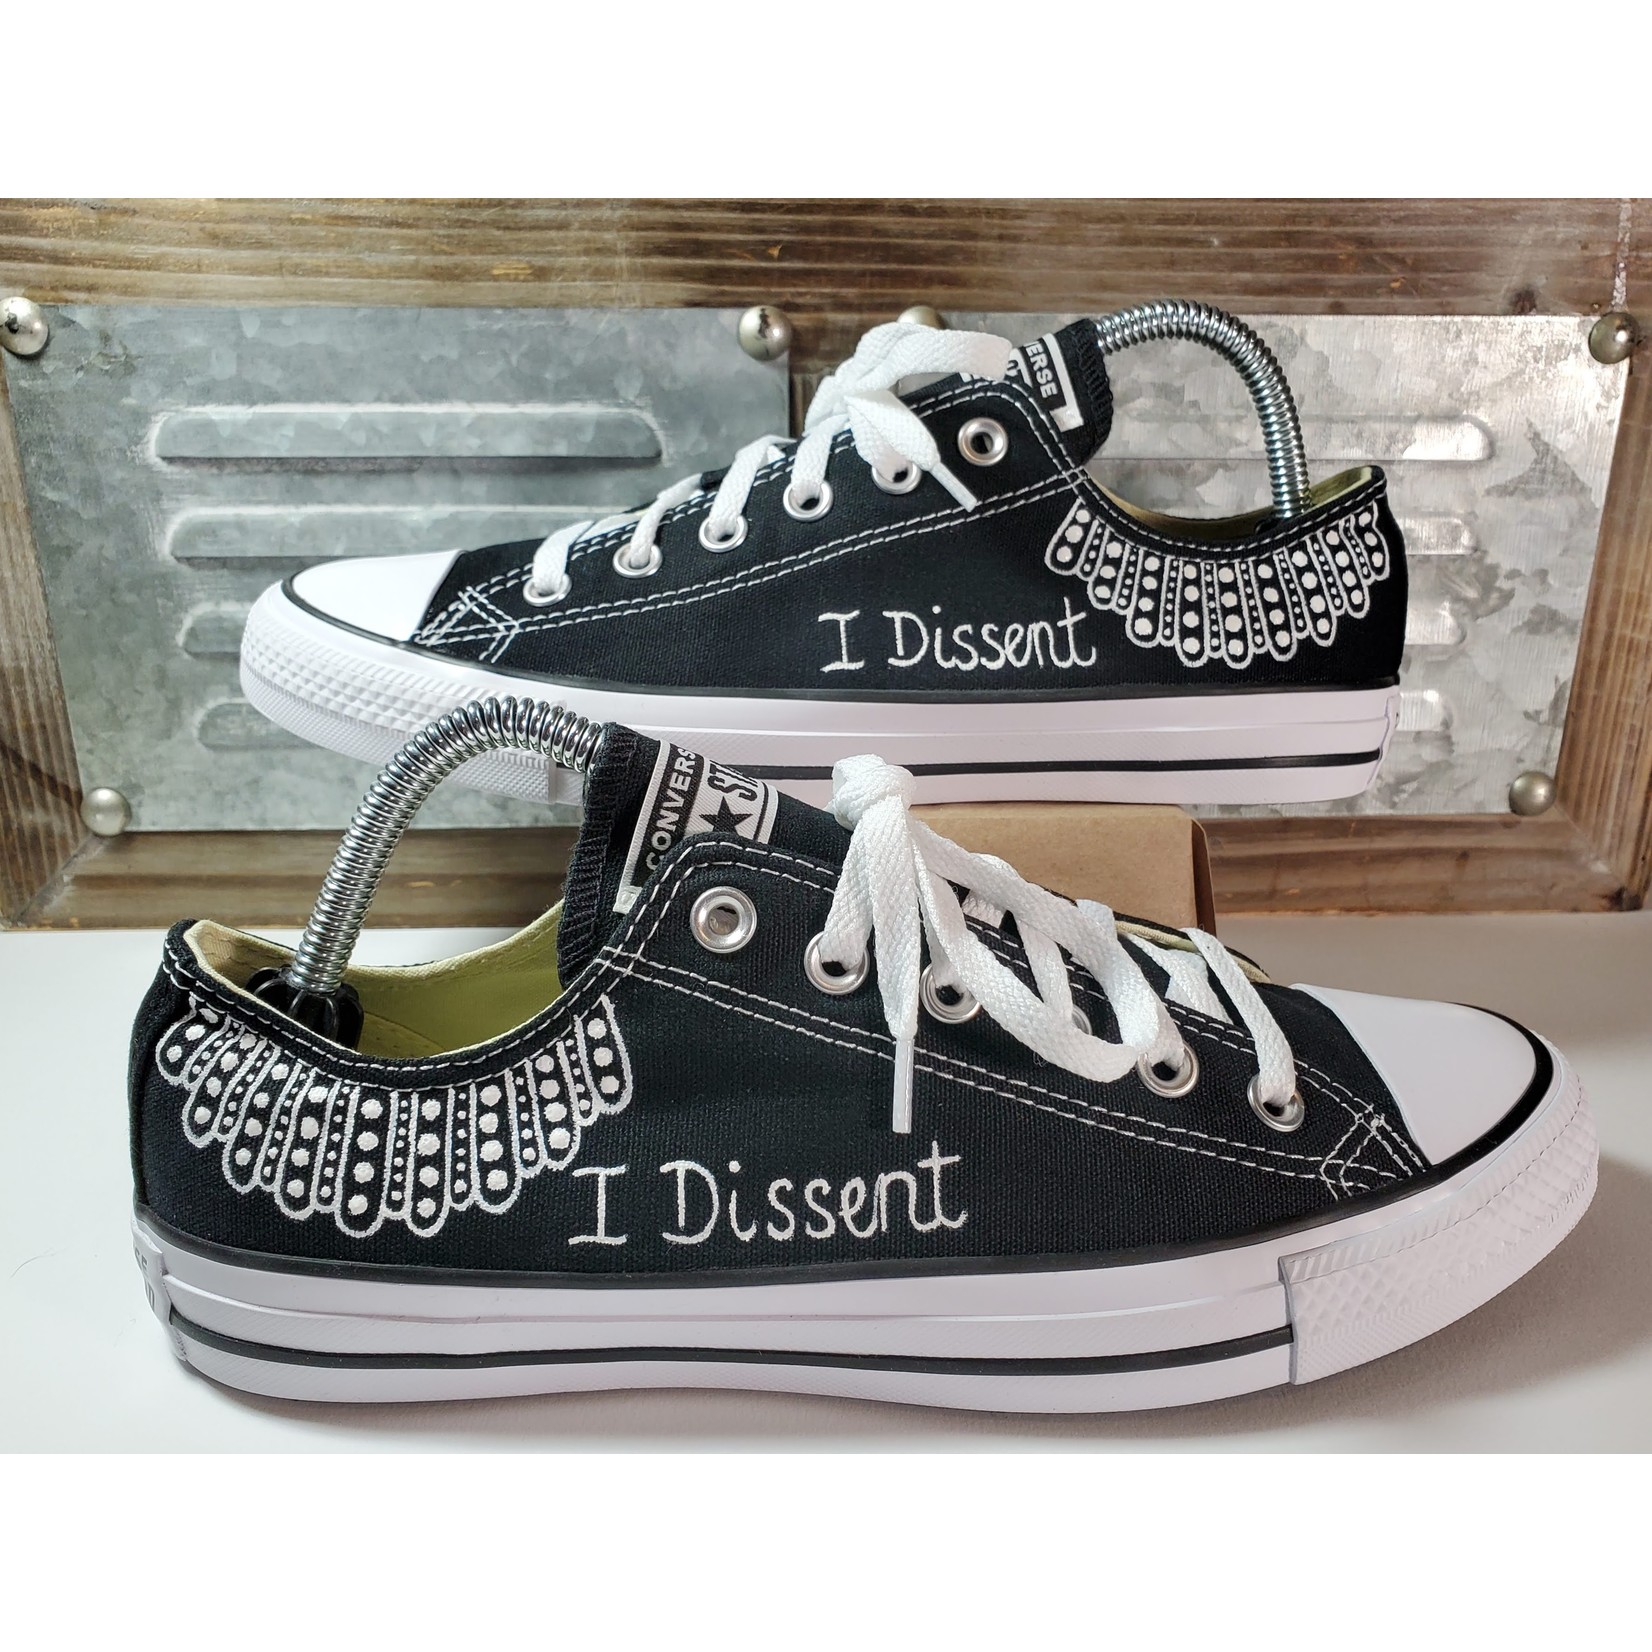 Stirling Studios Ruth Bader Ginsberg Custom Converse  -  Double Sided w/ Text "I Dissent"